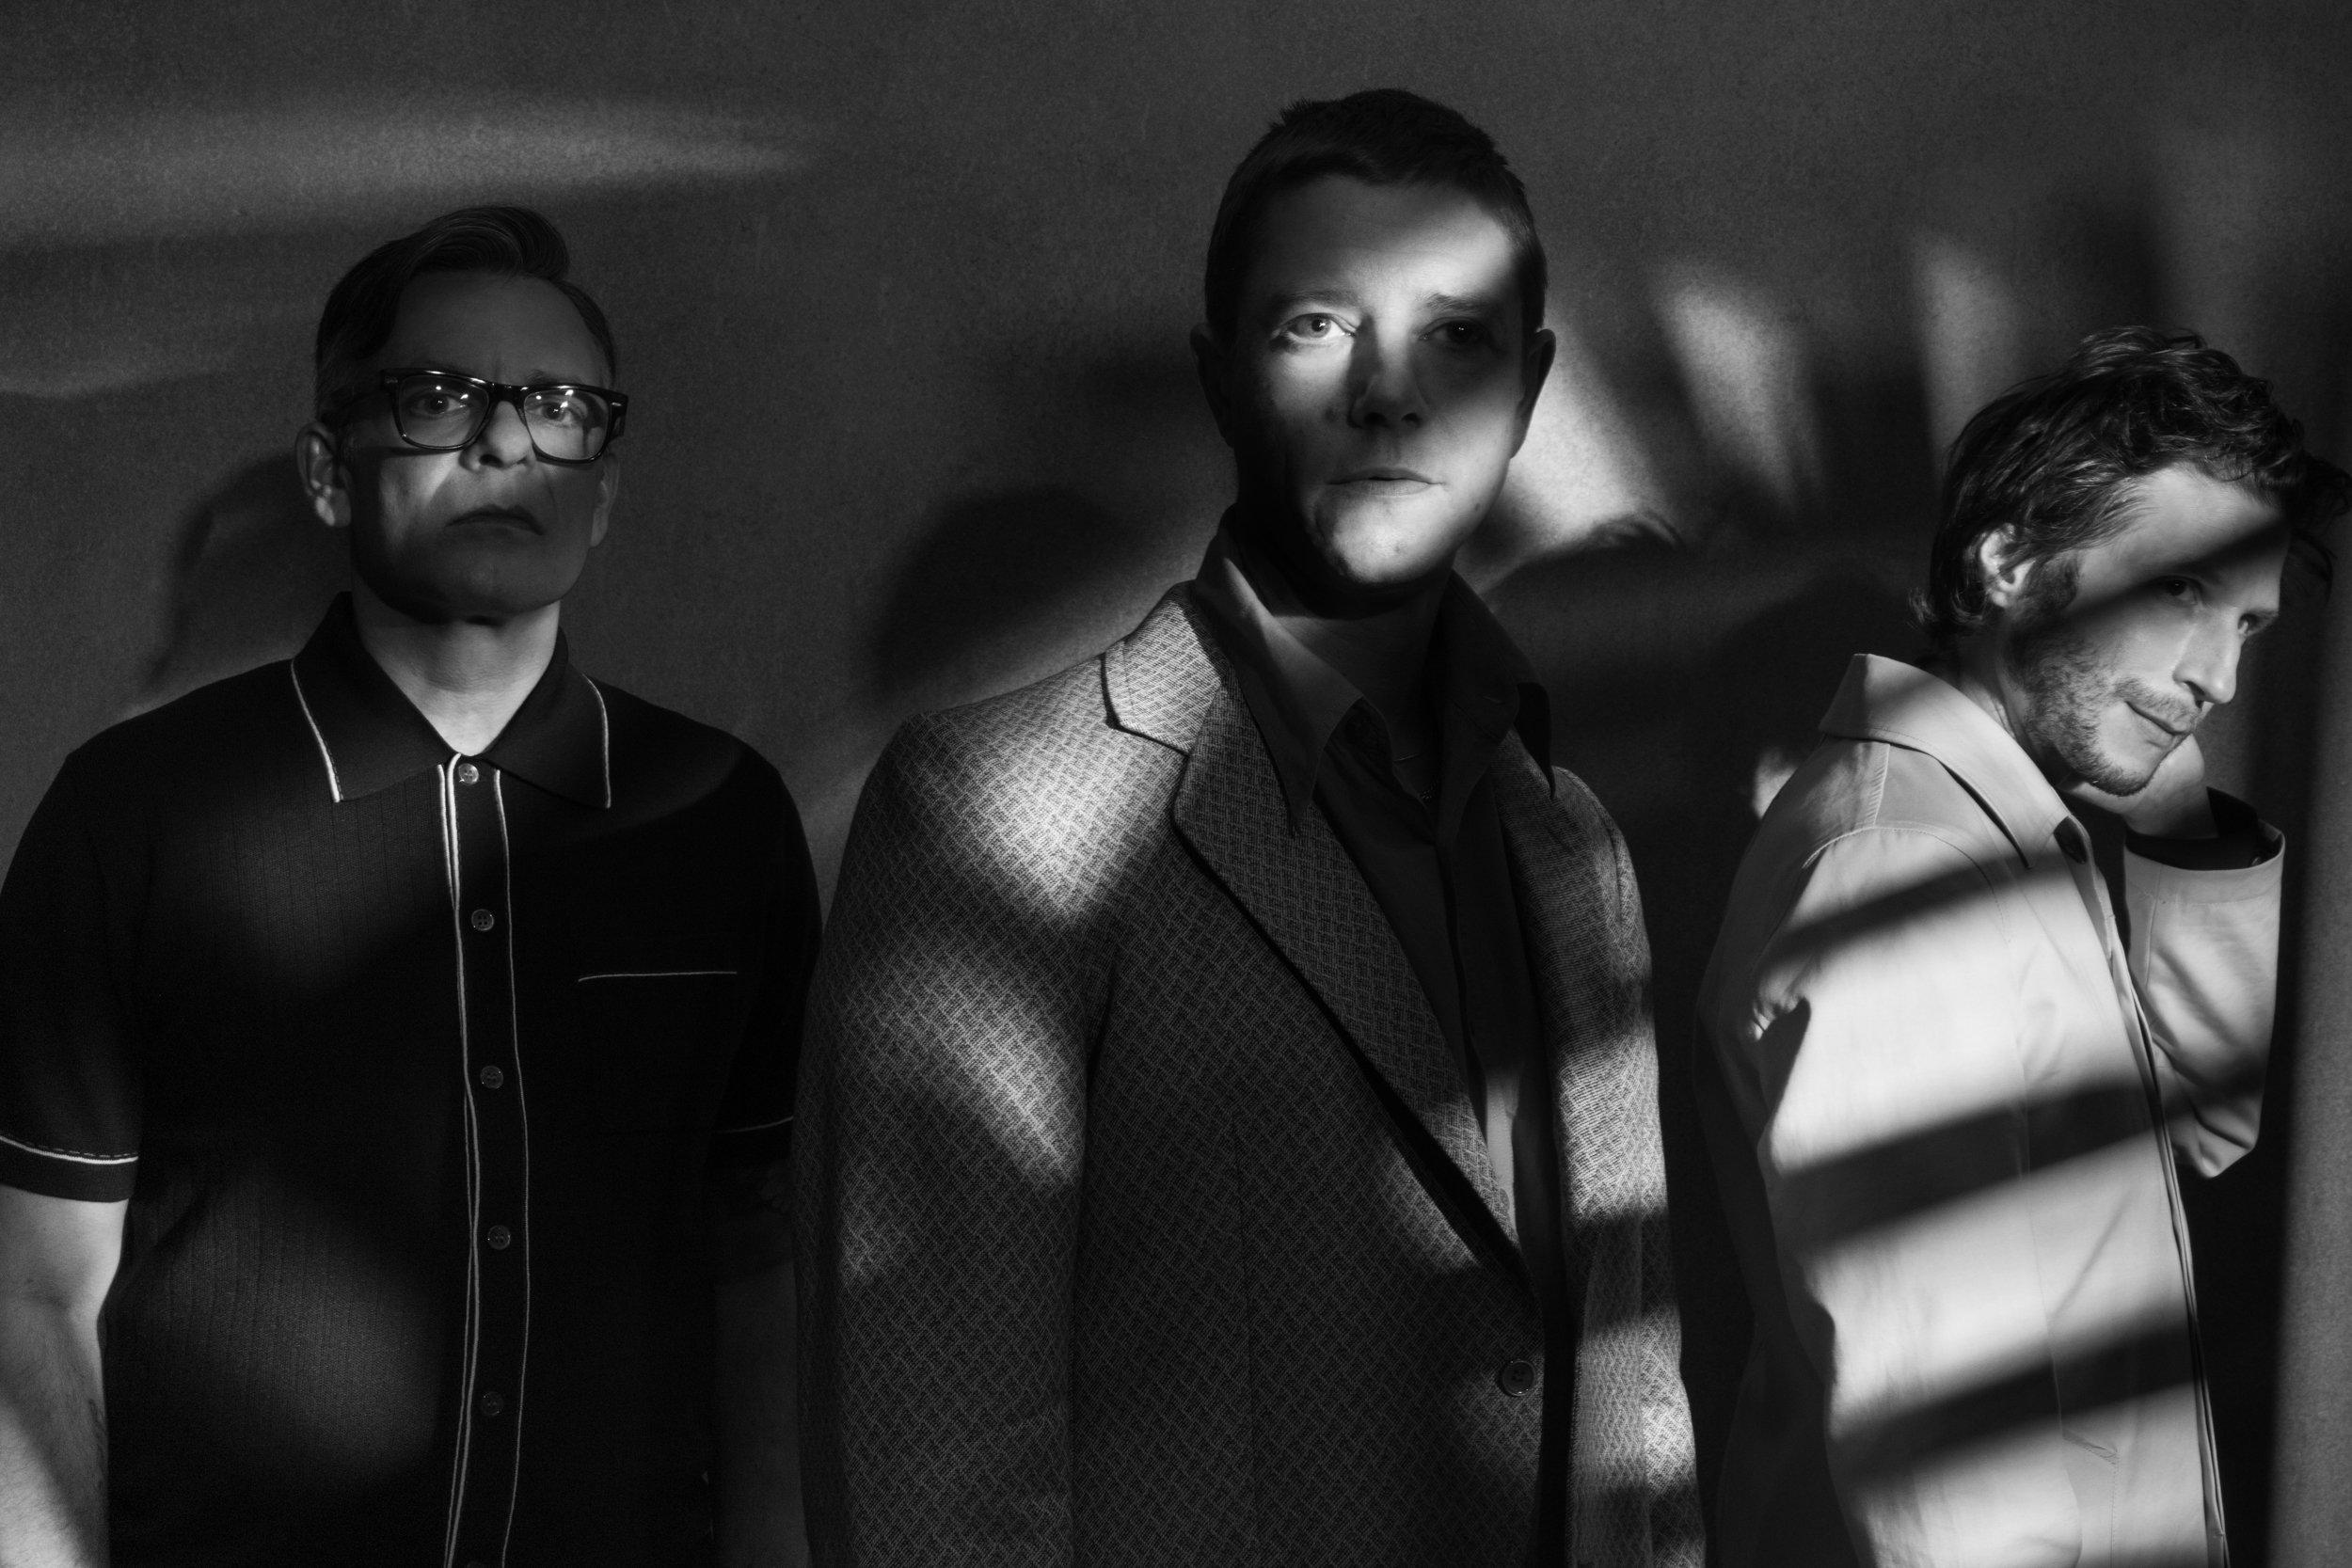 Interpol Release 'The Other Side Of Make-Believe': 3 Major